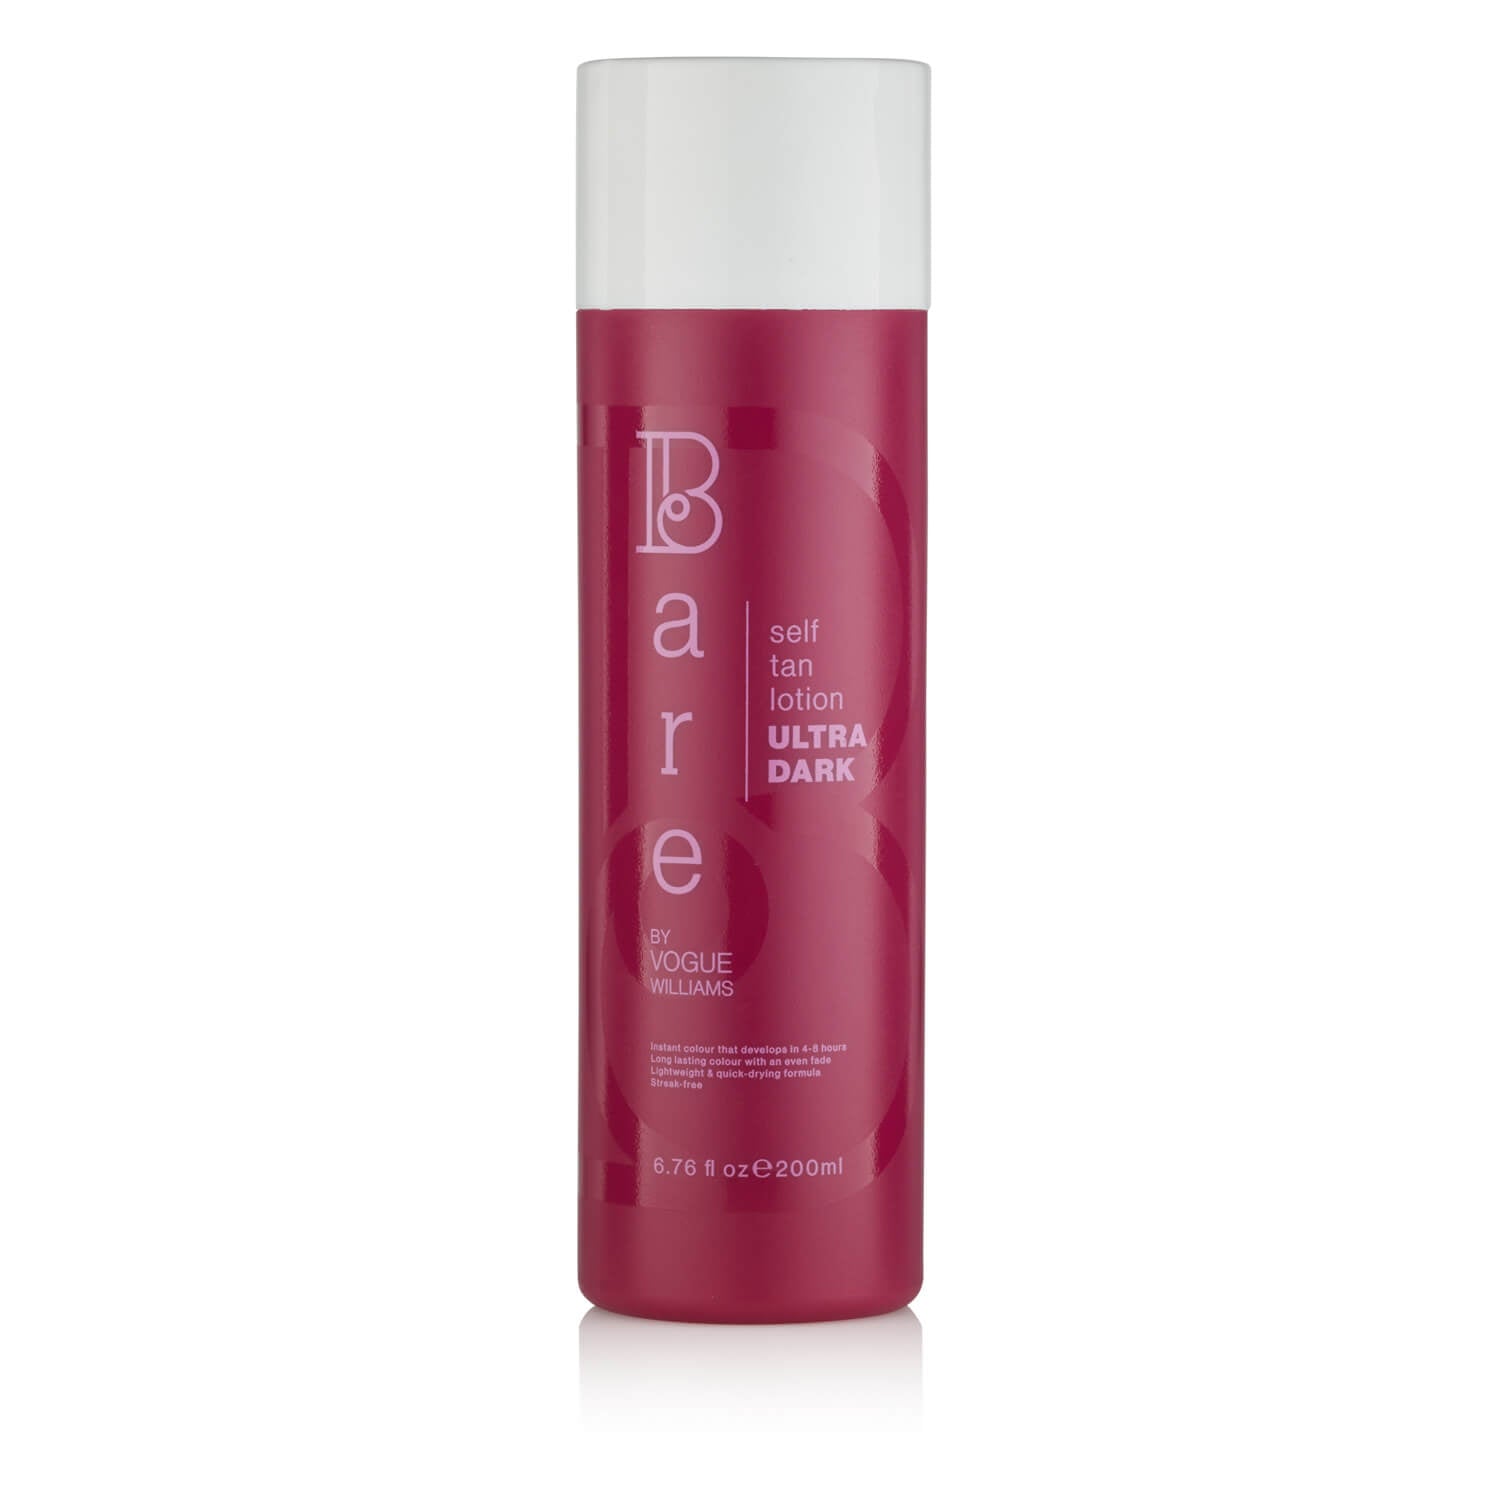 Bare By Vogue Self Tan Lotion 200ml – Ultra Dark 1 Shaws Department Stores